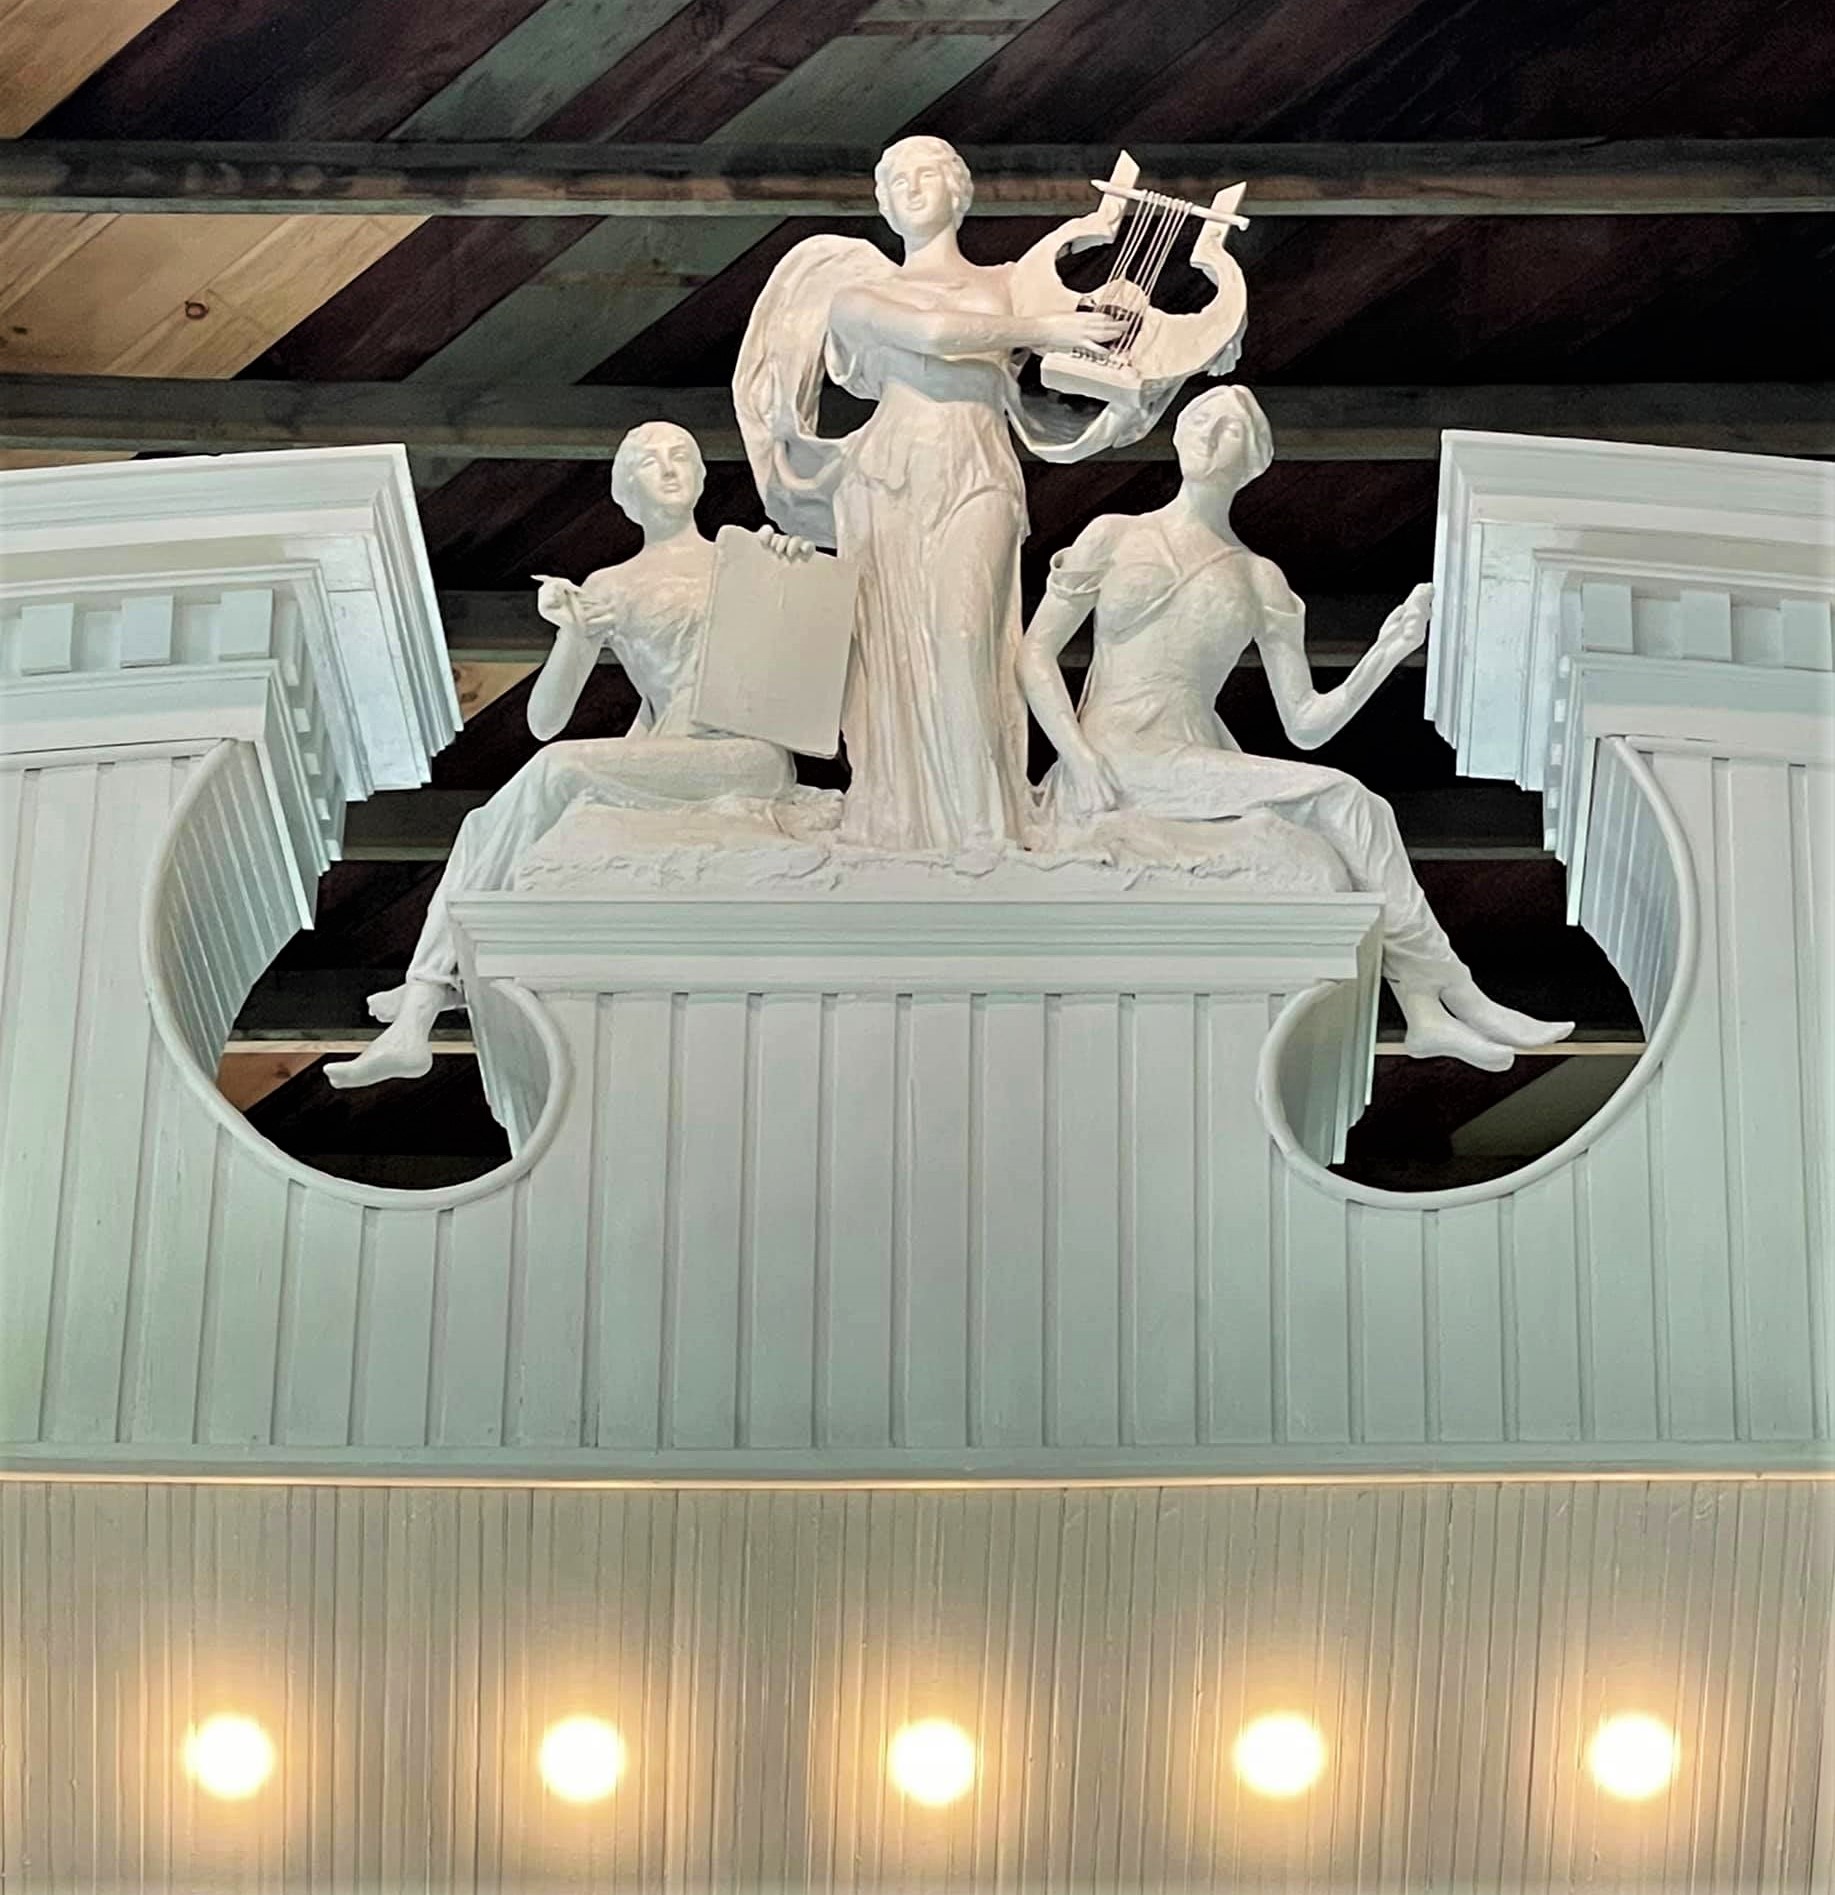 Photograph of sculpture by Robert Marshall Root at the apex of the proscenium of the Shelbyville Chautauqua Auditorium stage.